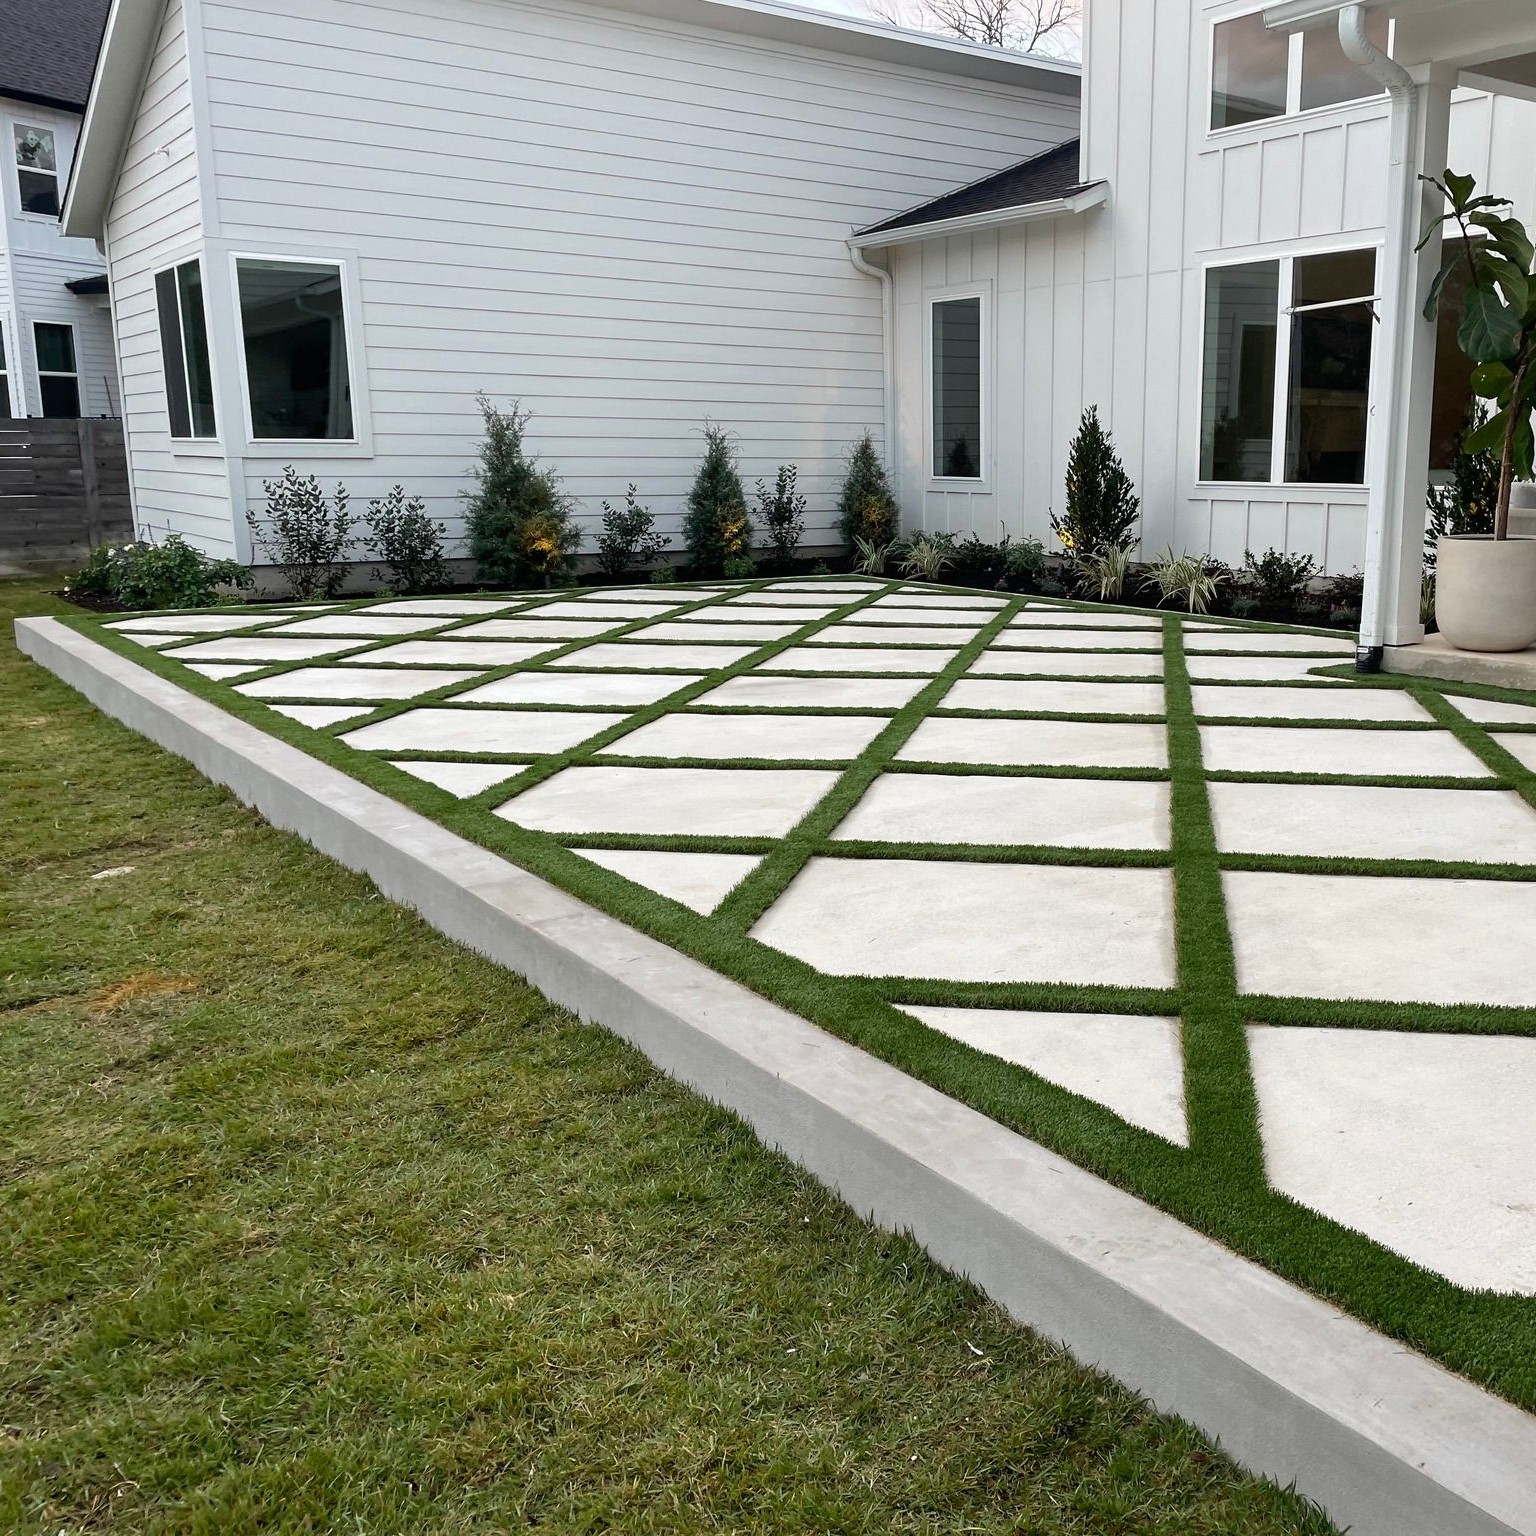 Turf Squares overlayed on large concrete patio extension with landscaping along edges behind a white house